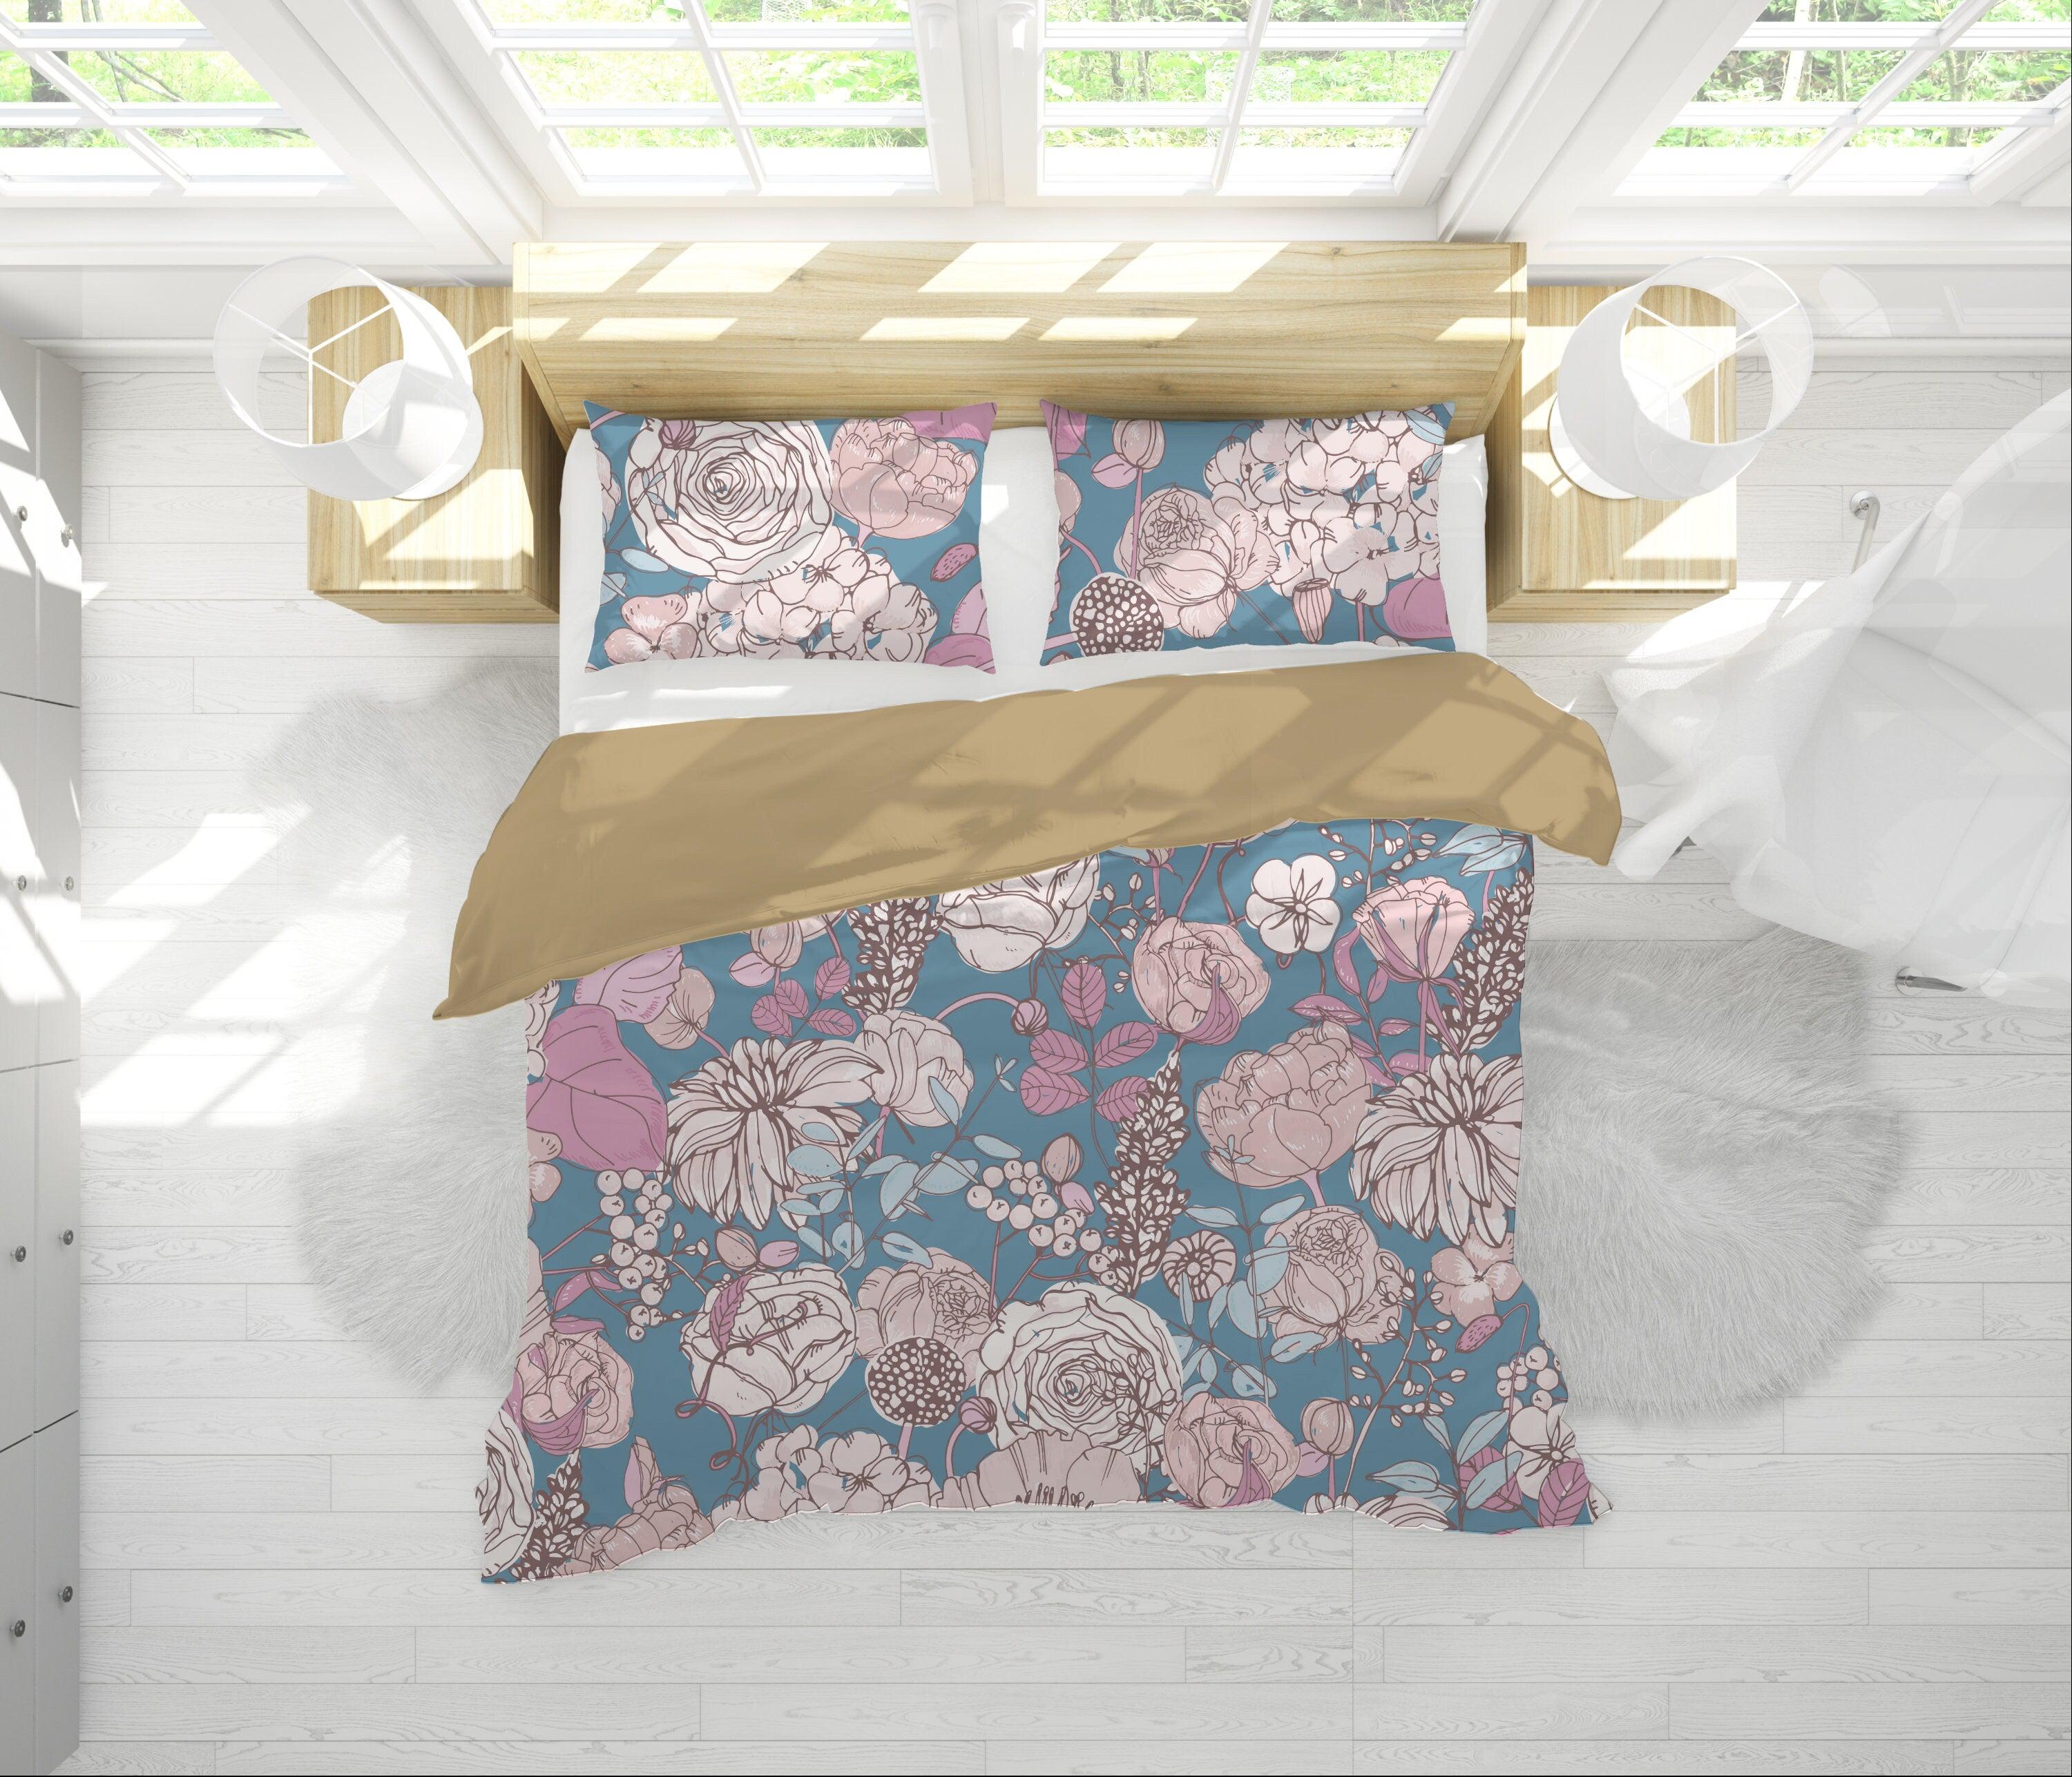 daintyduvet Blue Duvet Cover Set with Pink Hand drawn Flowers